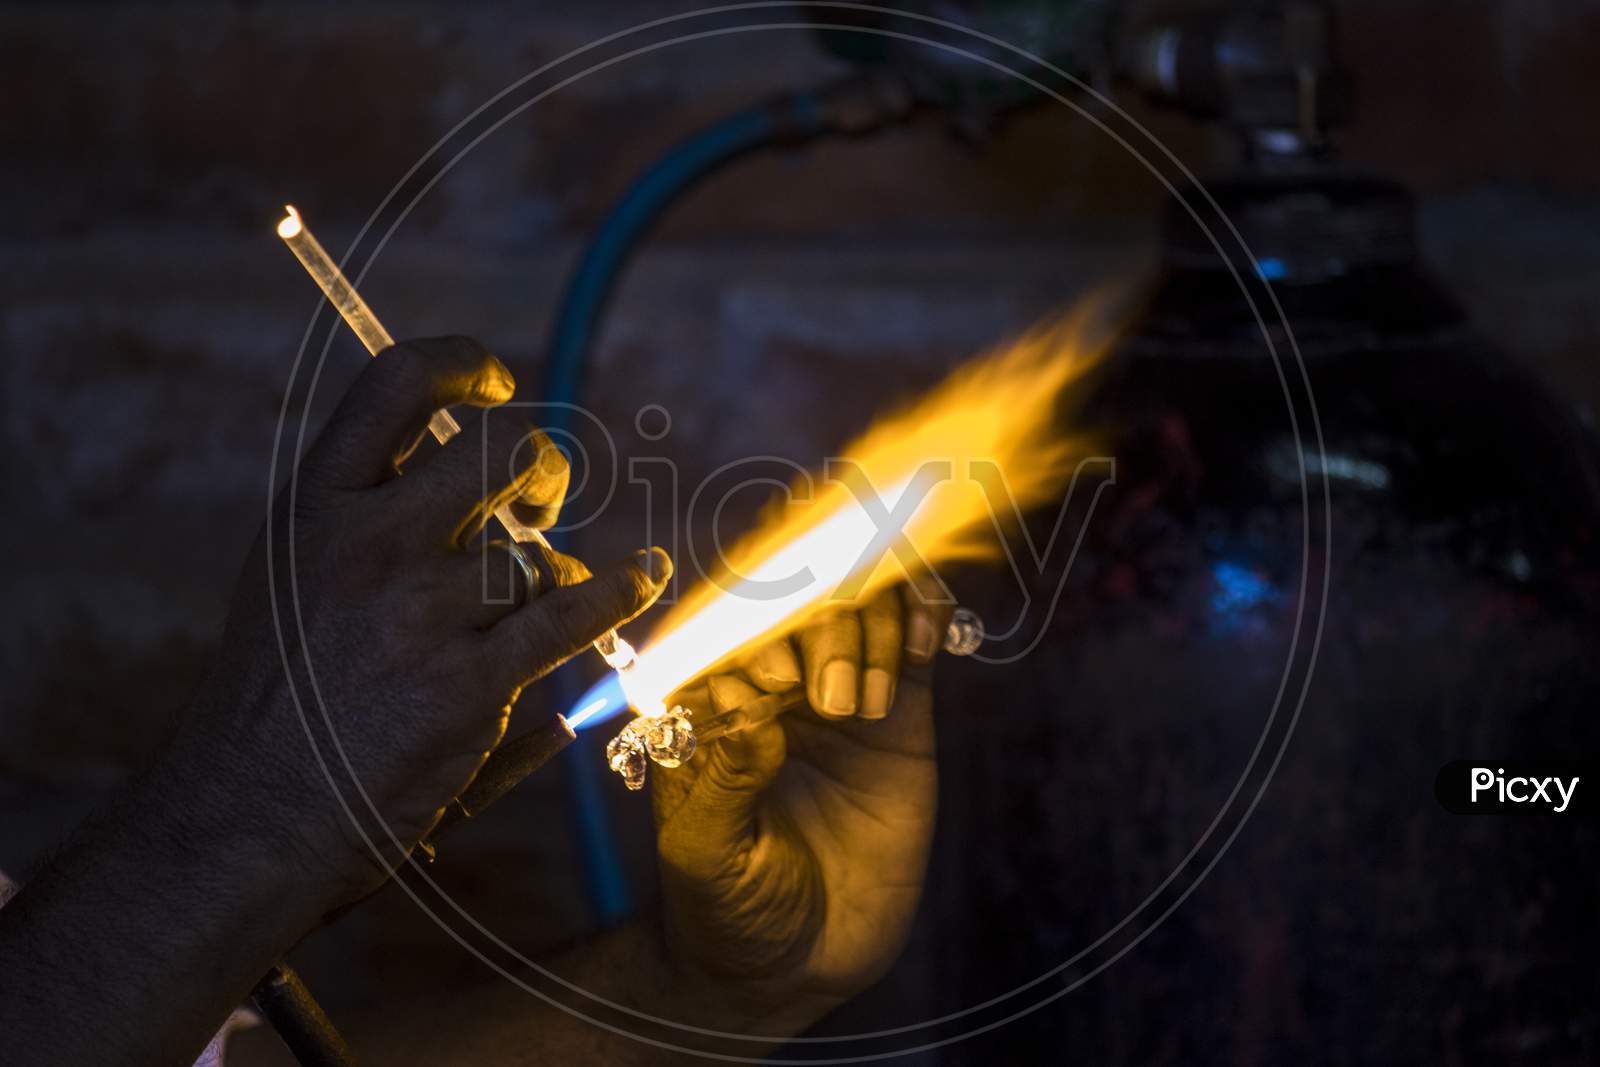 Glass Blowing  With Fire Sparks Cloeup